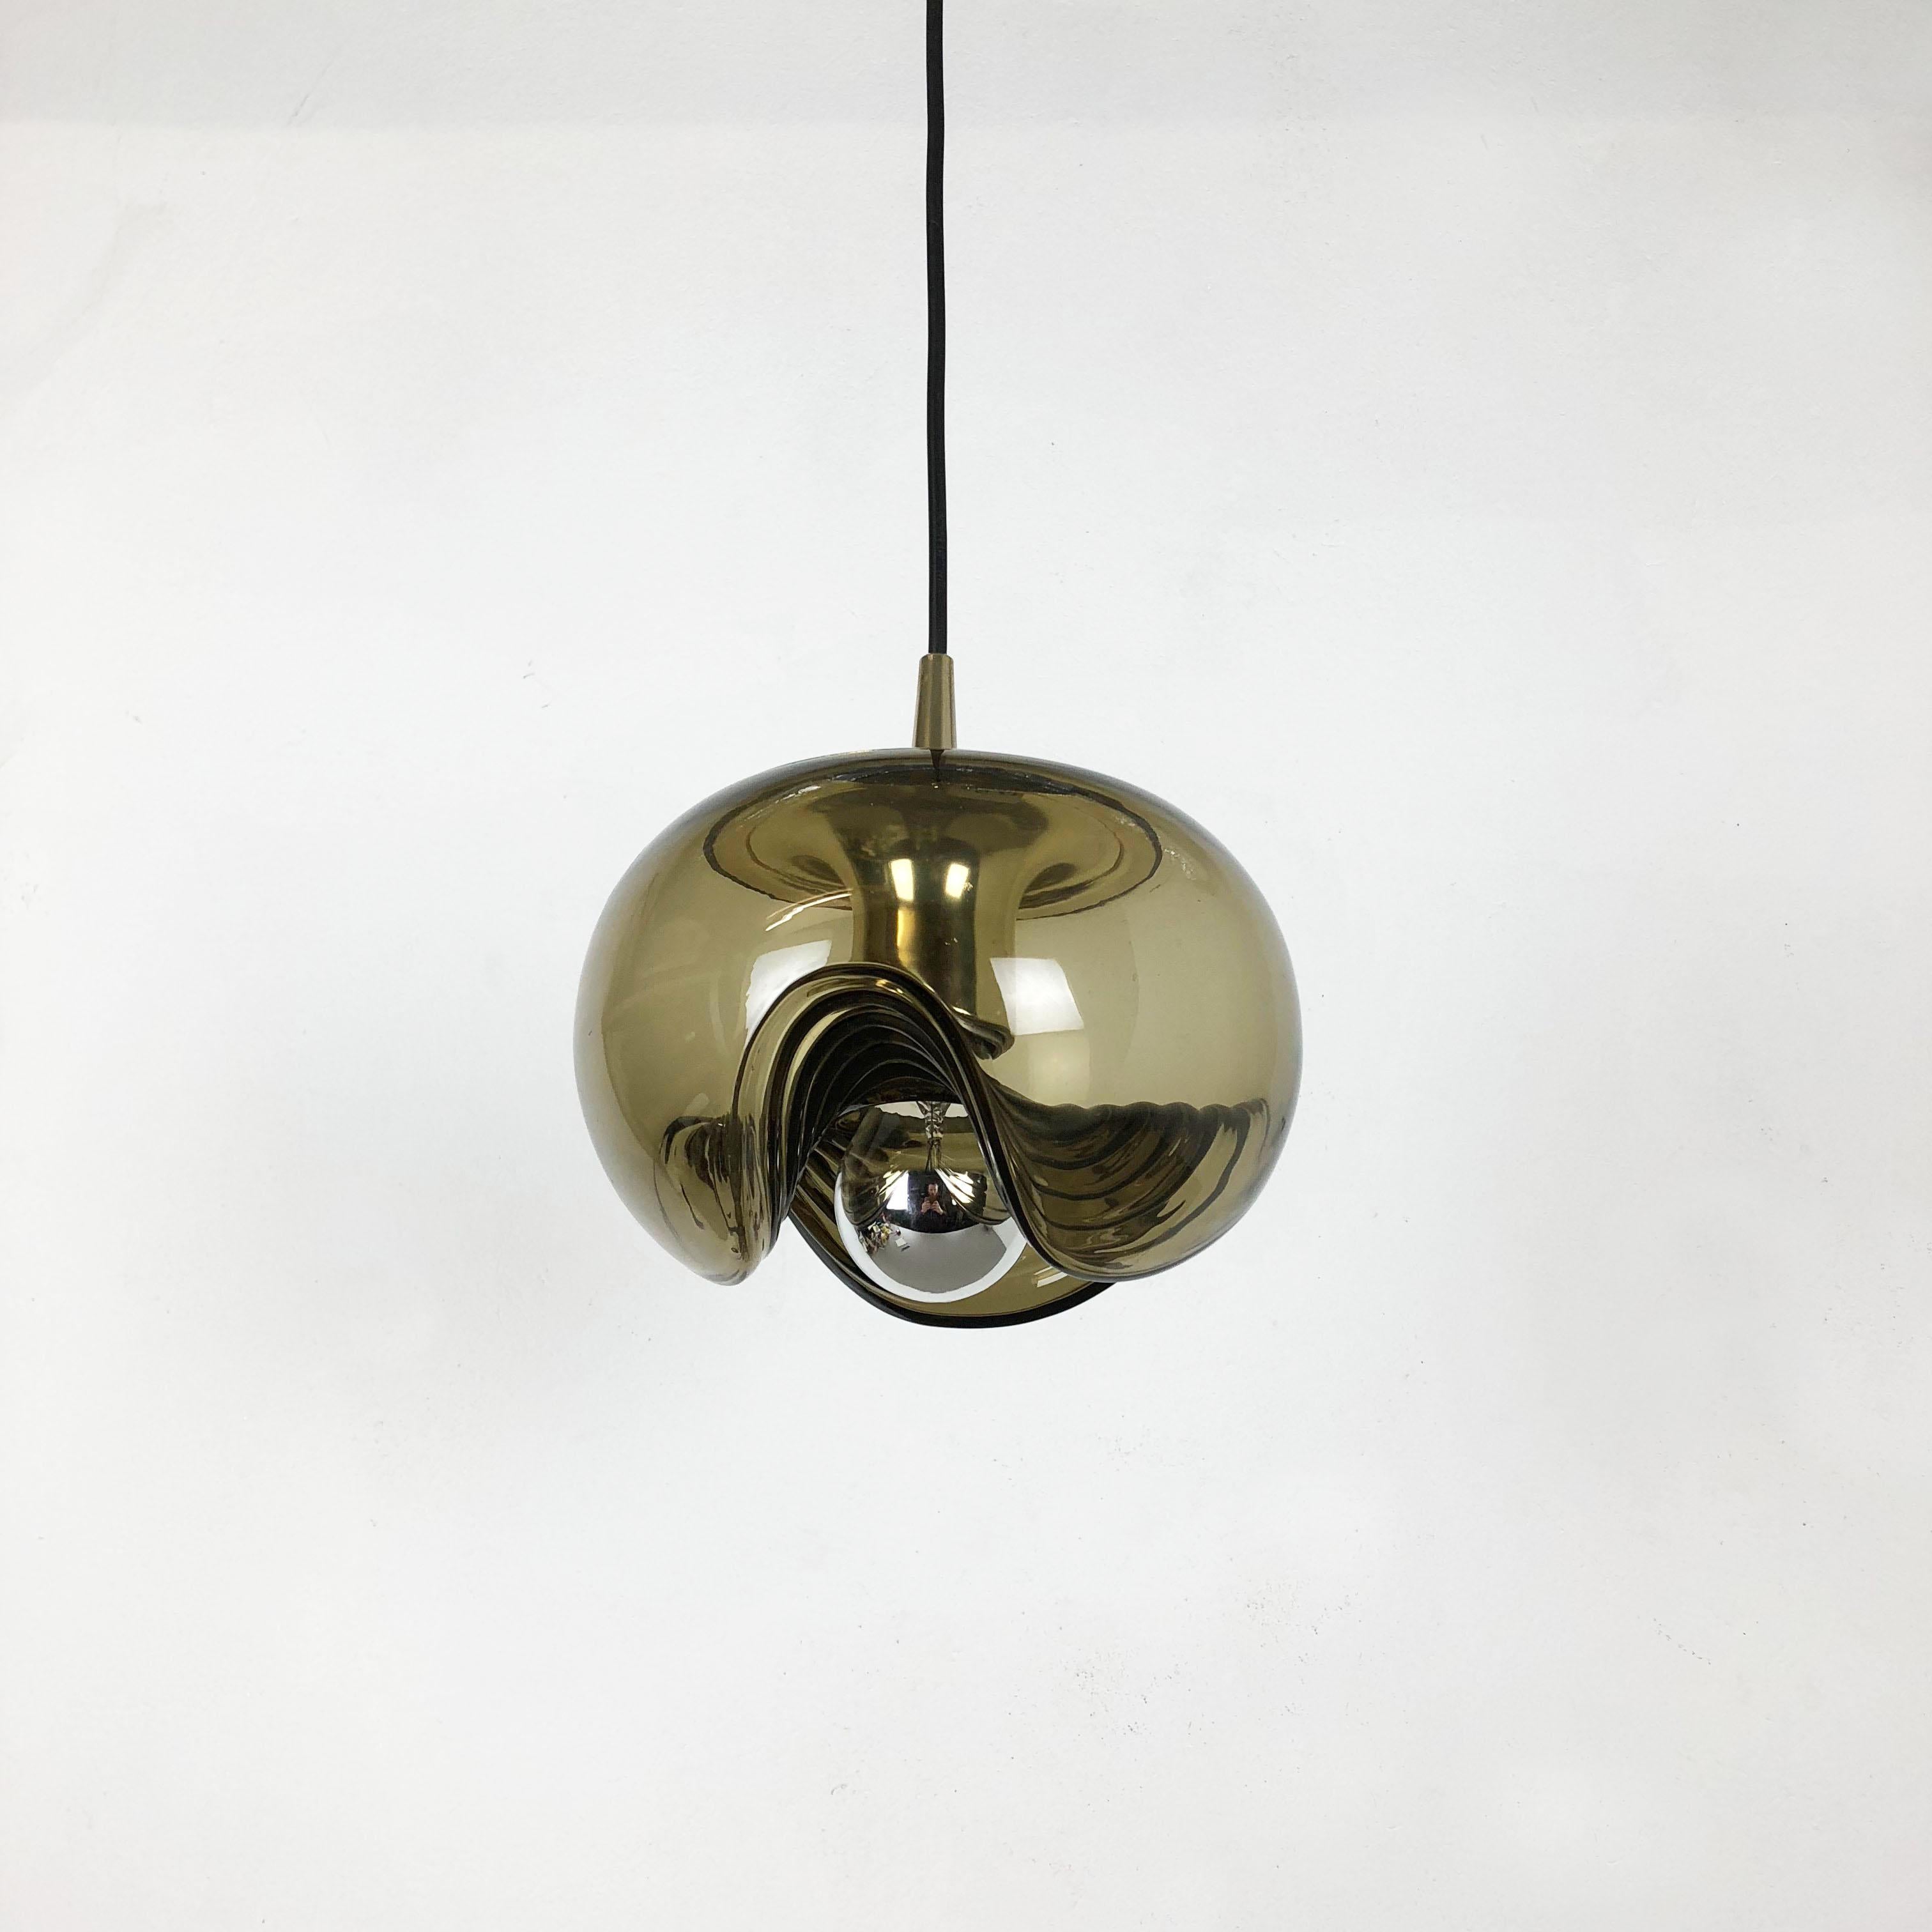 Article:

Pendant glass lights light green


Producer:

Peill and Putzler, Germany


Design:

Koch & Lowy



Origin:

Germany



Age:

1970s





Original 1970s modernist German pendant Light made of glass and metal.